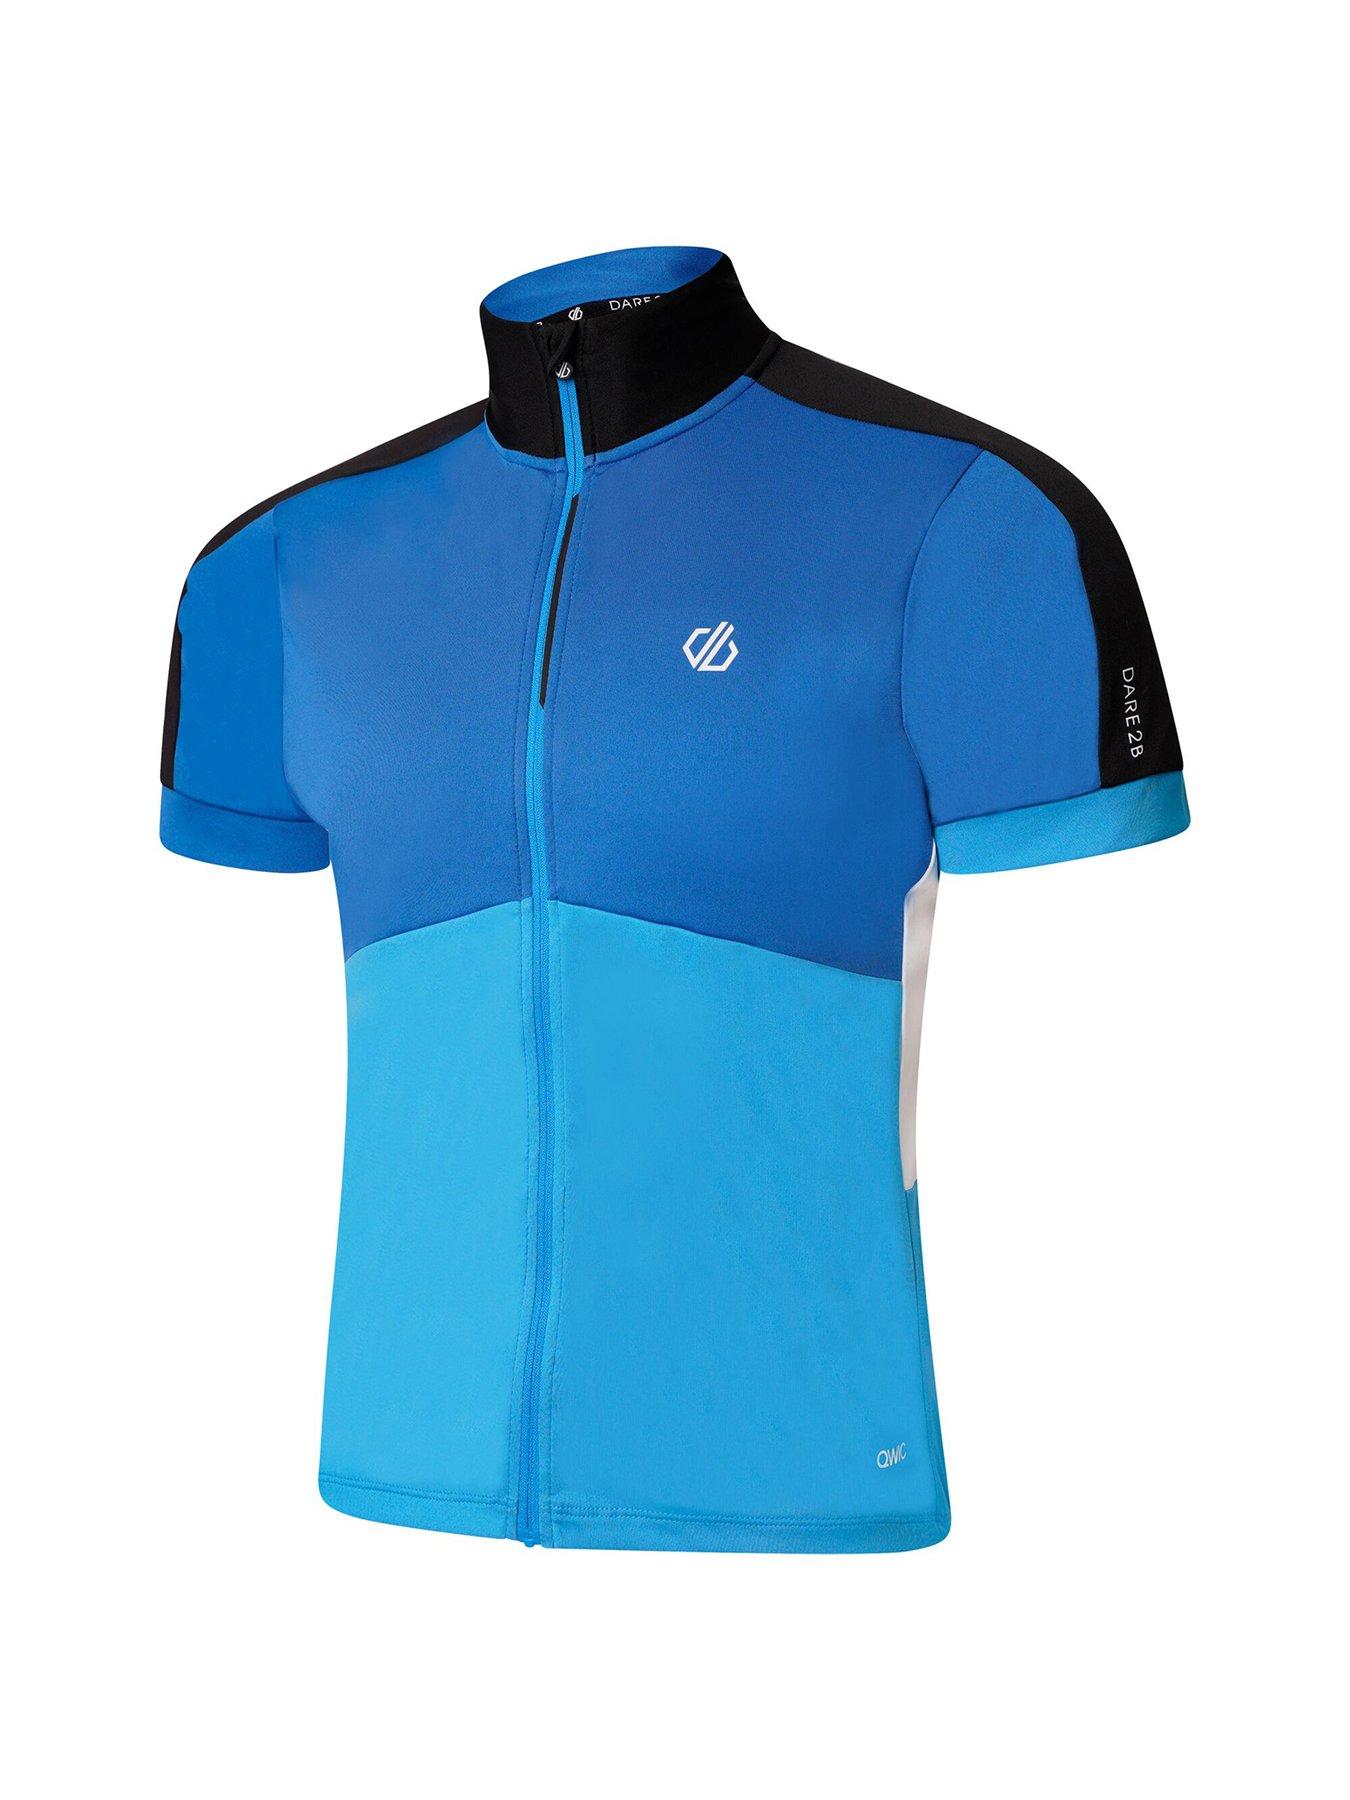  PROTRACTION II BLUE MENS CYCLING JERSEY